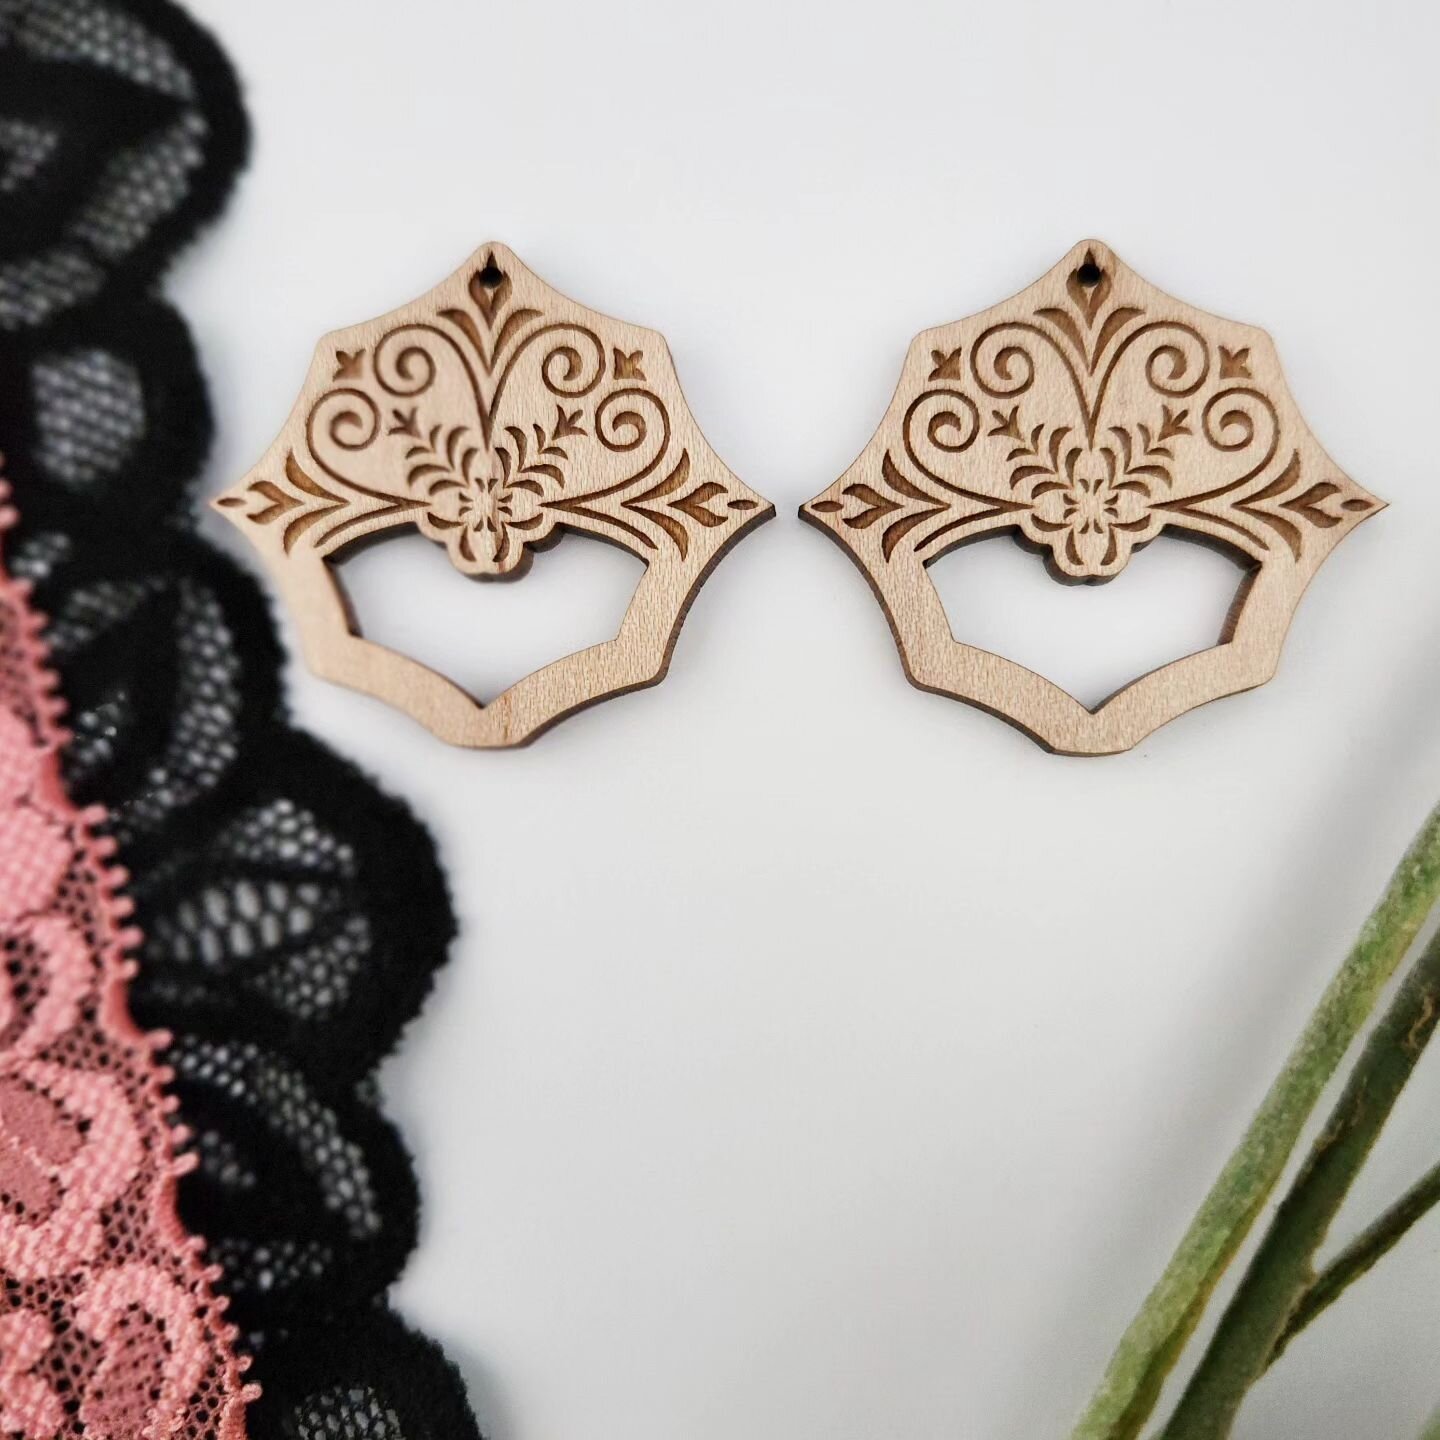 💥NEW💥

Floral design 3- now up in the shop!

Did you know ANY of my styles can be made *without* the macrame strip?

.
.
.

#wholesaleearrings #earringwholesale #earringwholesaler #macrameearring #macrameearringblanks #macrameearringparts #macramee